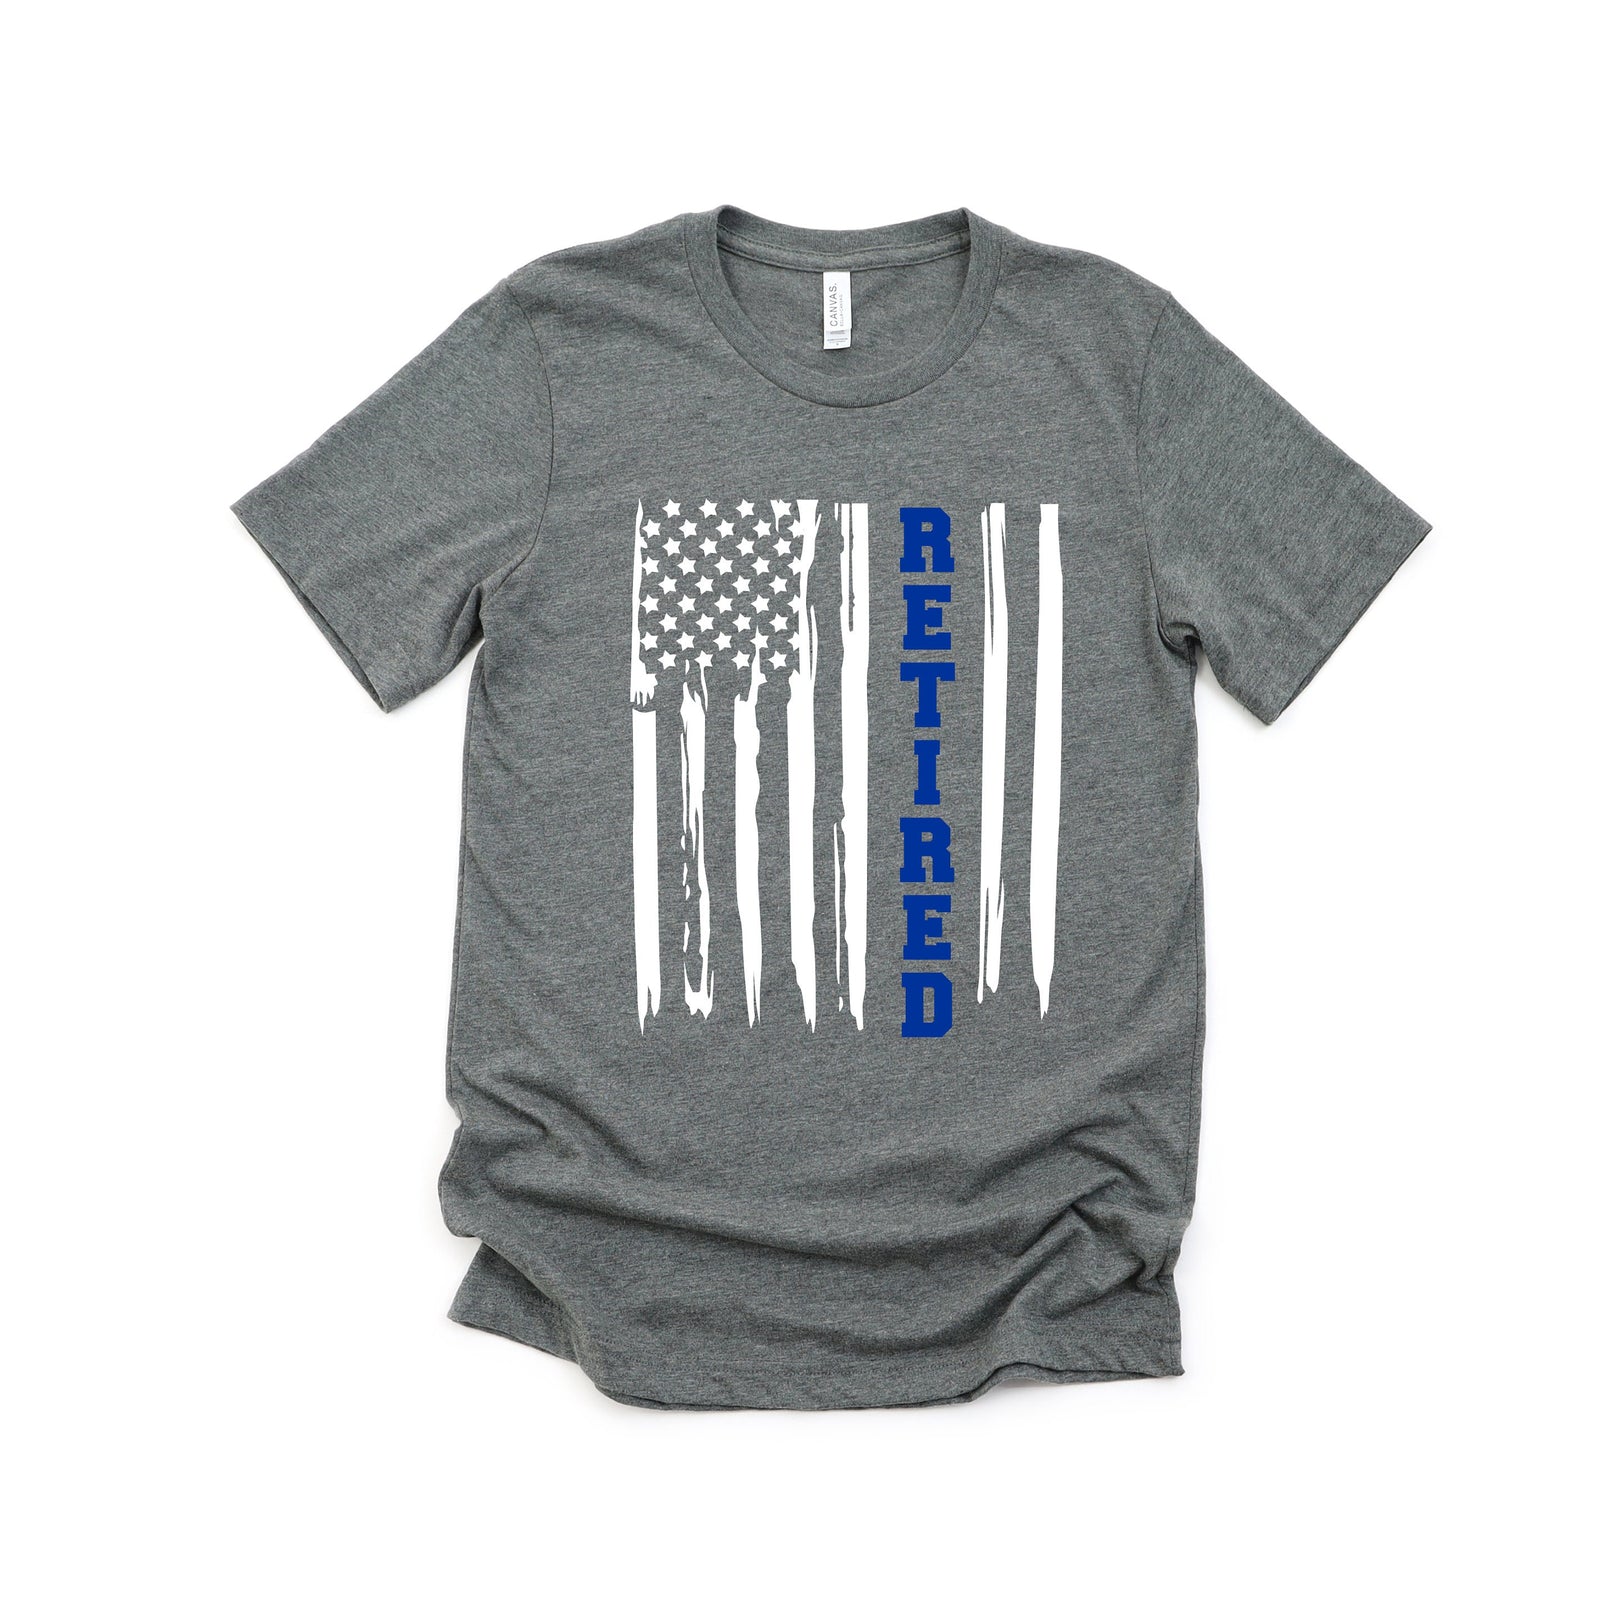 Retired Police Officer - American Flag with Blue Stripe - Police Officer Love T Shirt - Law Enforcement Retirement Gift